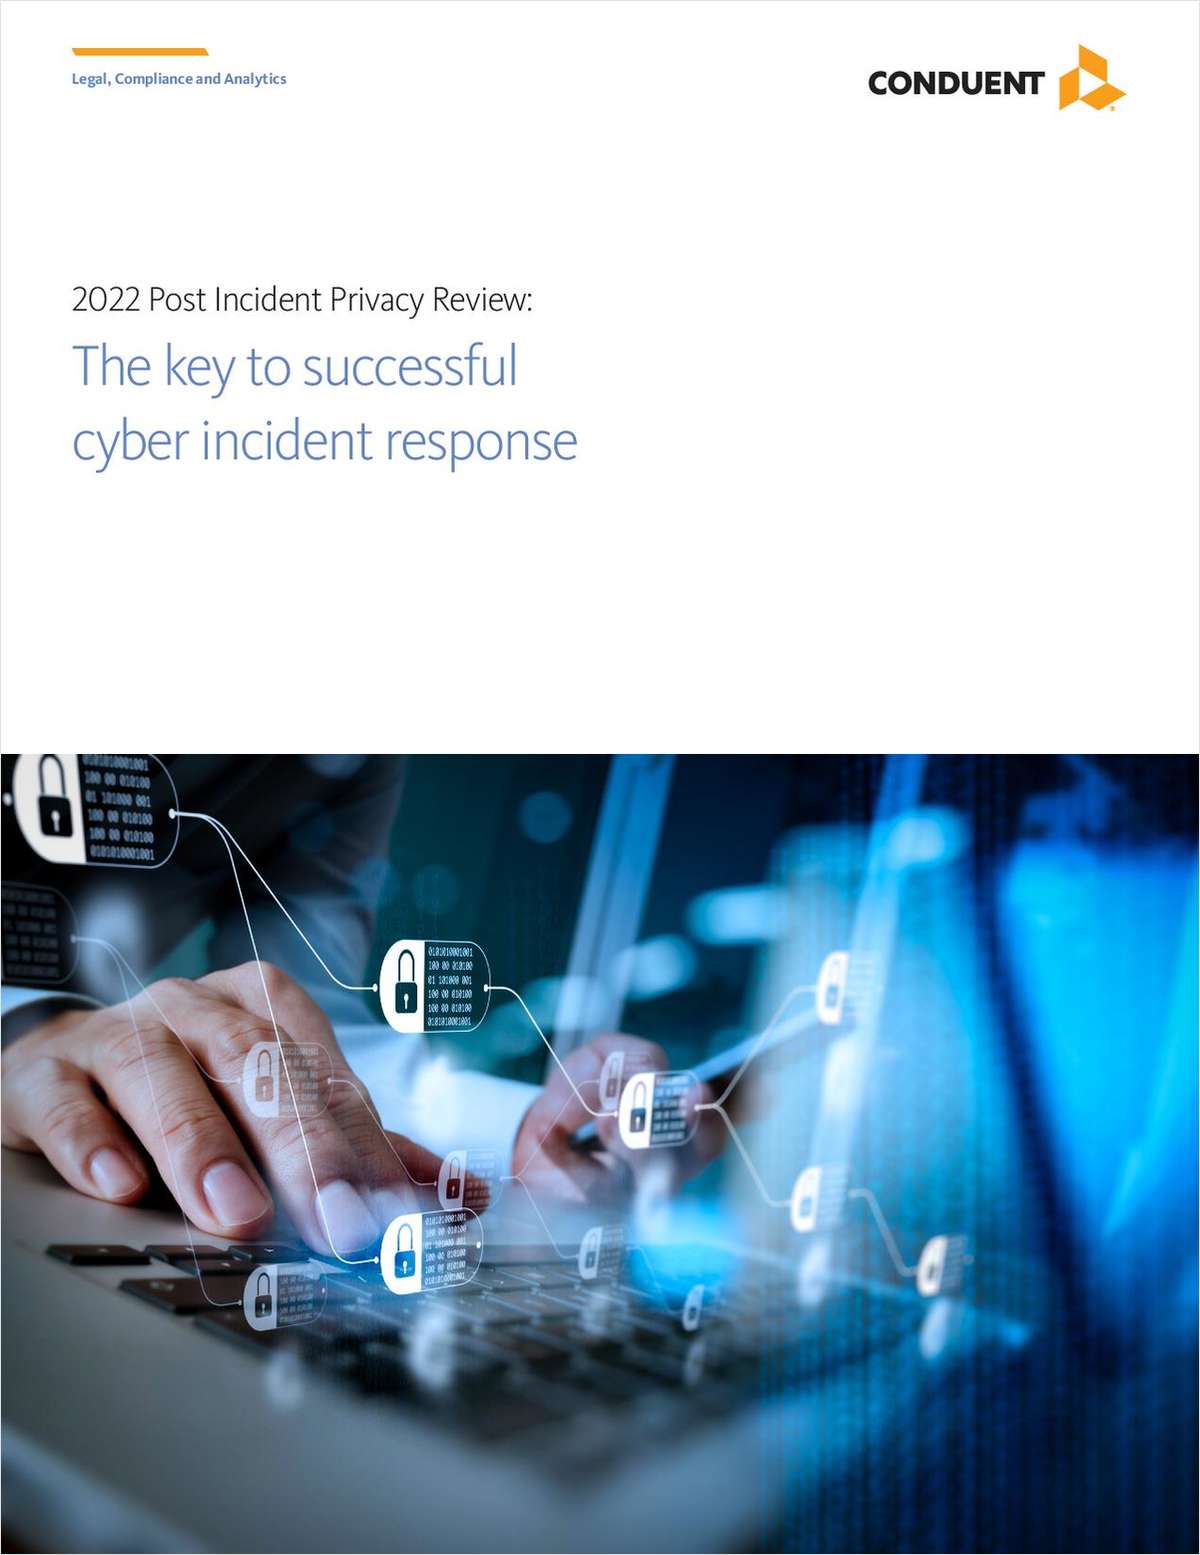 2022 Post Incident Privacy Review: The Key to Successful Cyber Incident Response